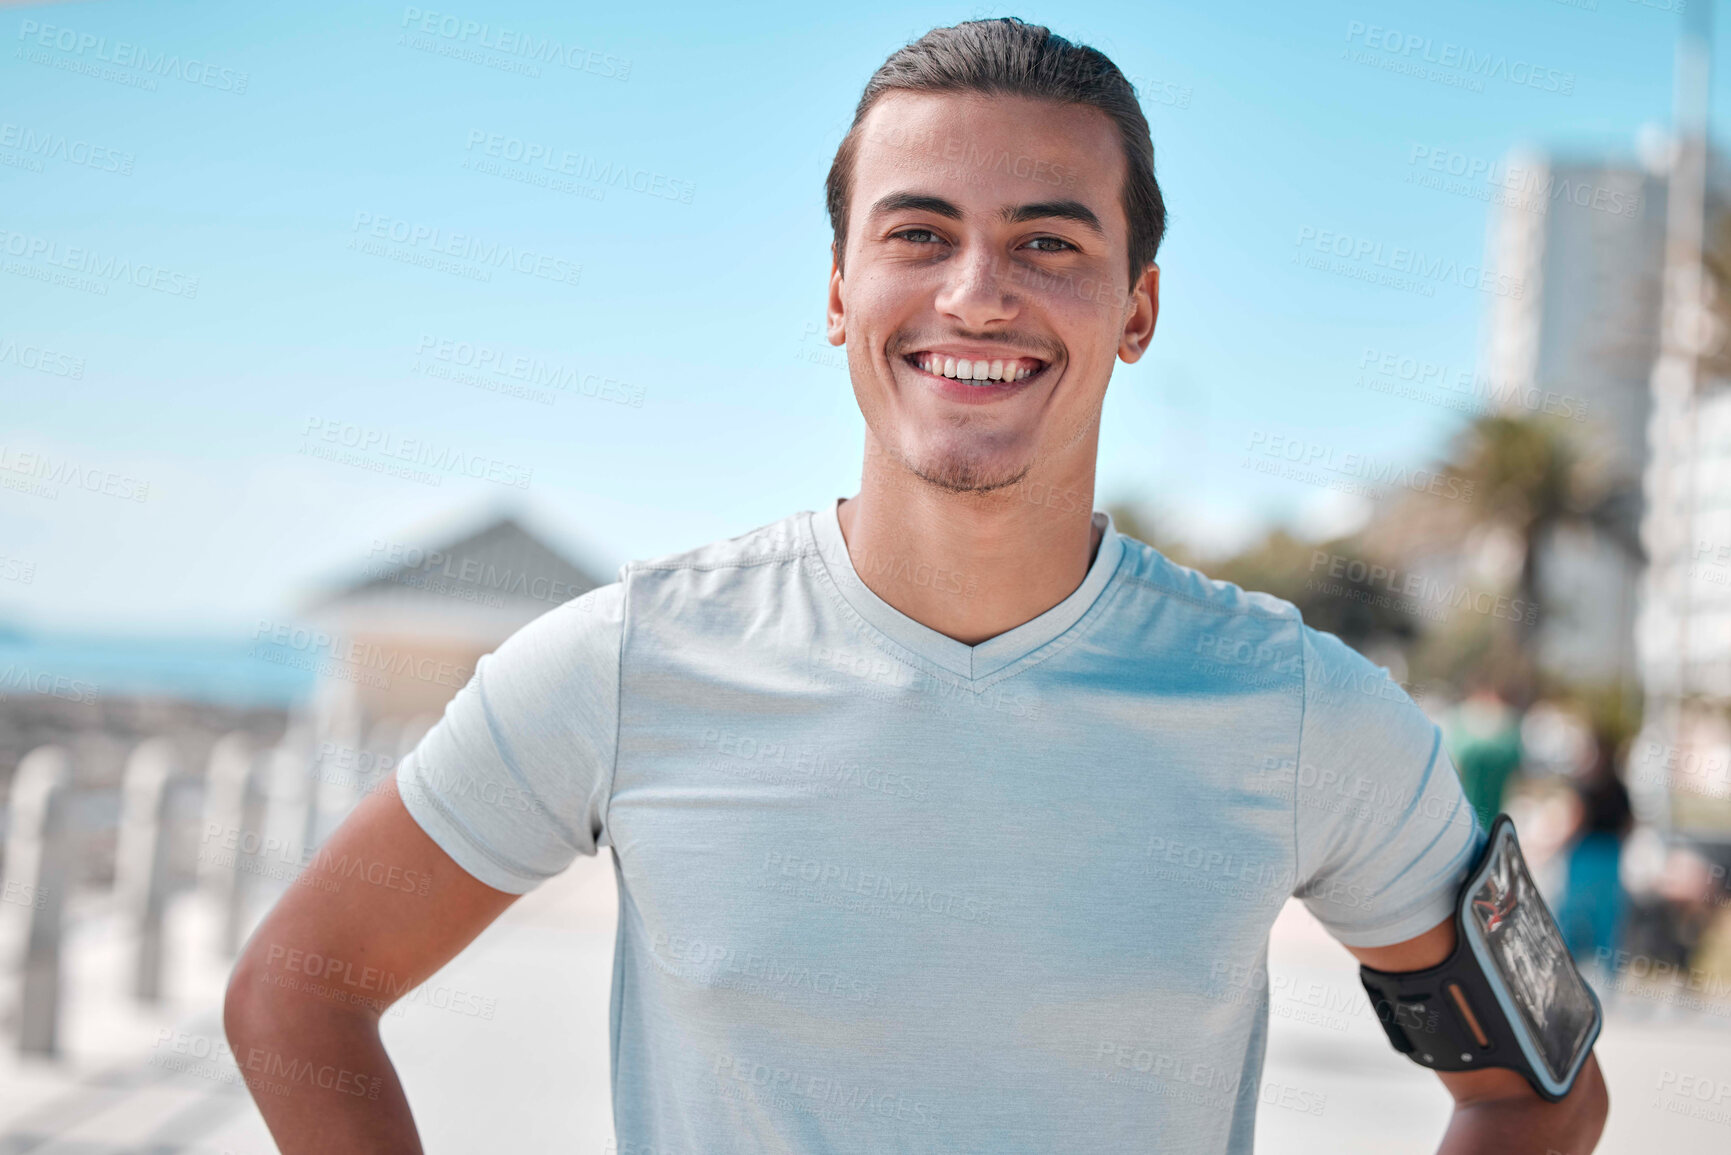 Buy stock photo Fitness, exercise and portrait of man with smile ready to start workout, training and cardio warm up. Sports, motivation mindset and male athlete in Miami for wellness, healthy lifestyle and running